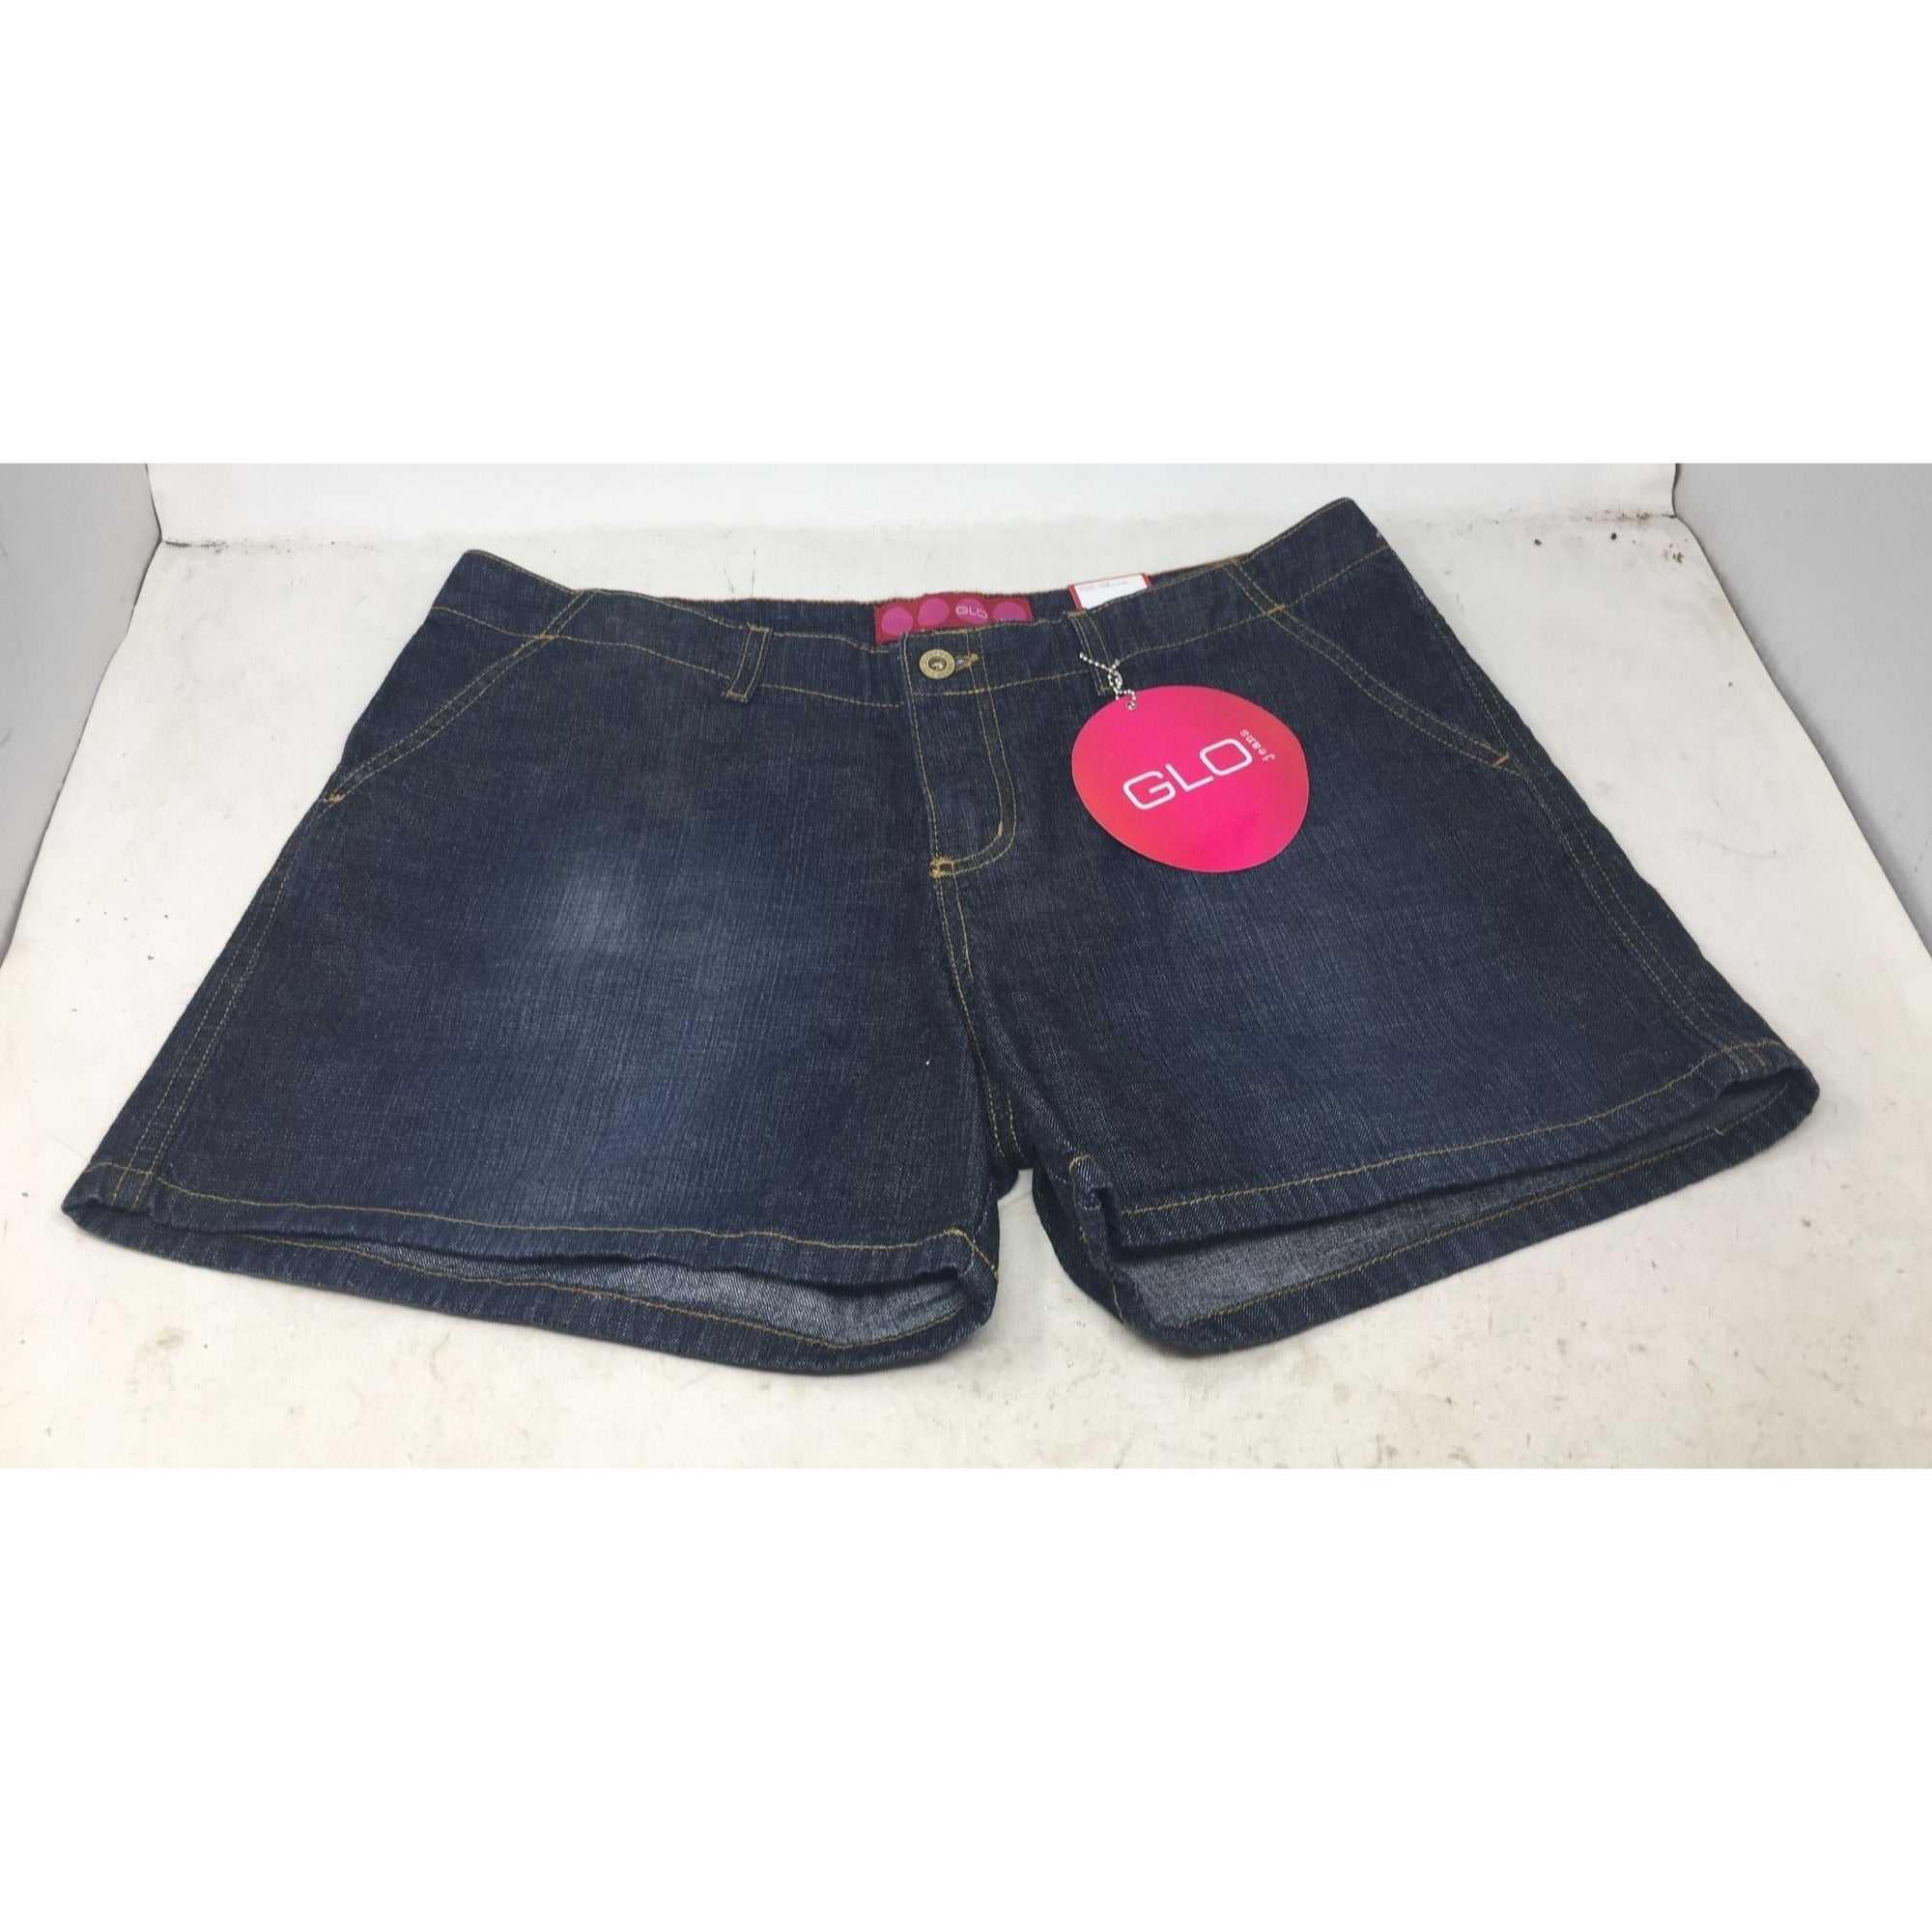 Juniors Size 13 GLO Jeans Denim Shorts New with Tags